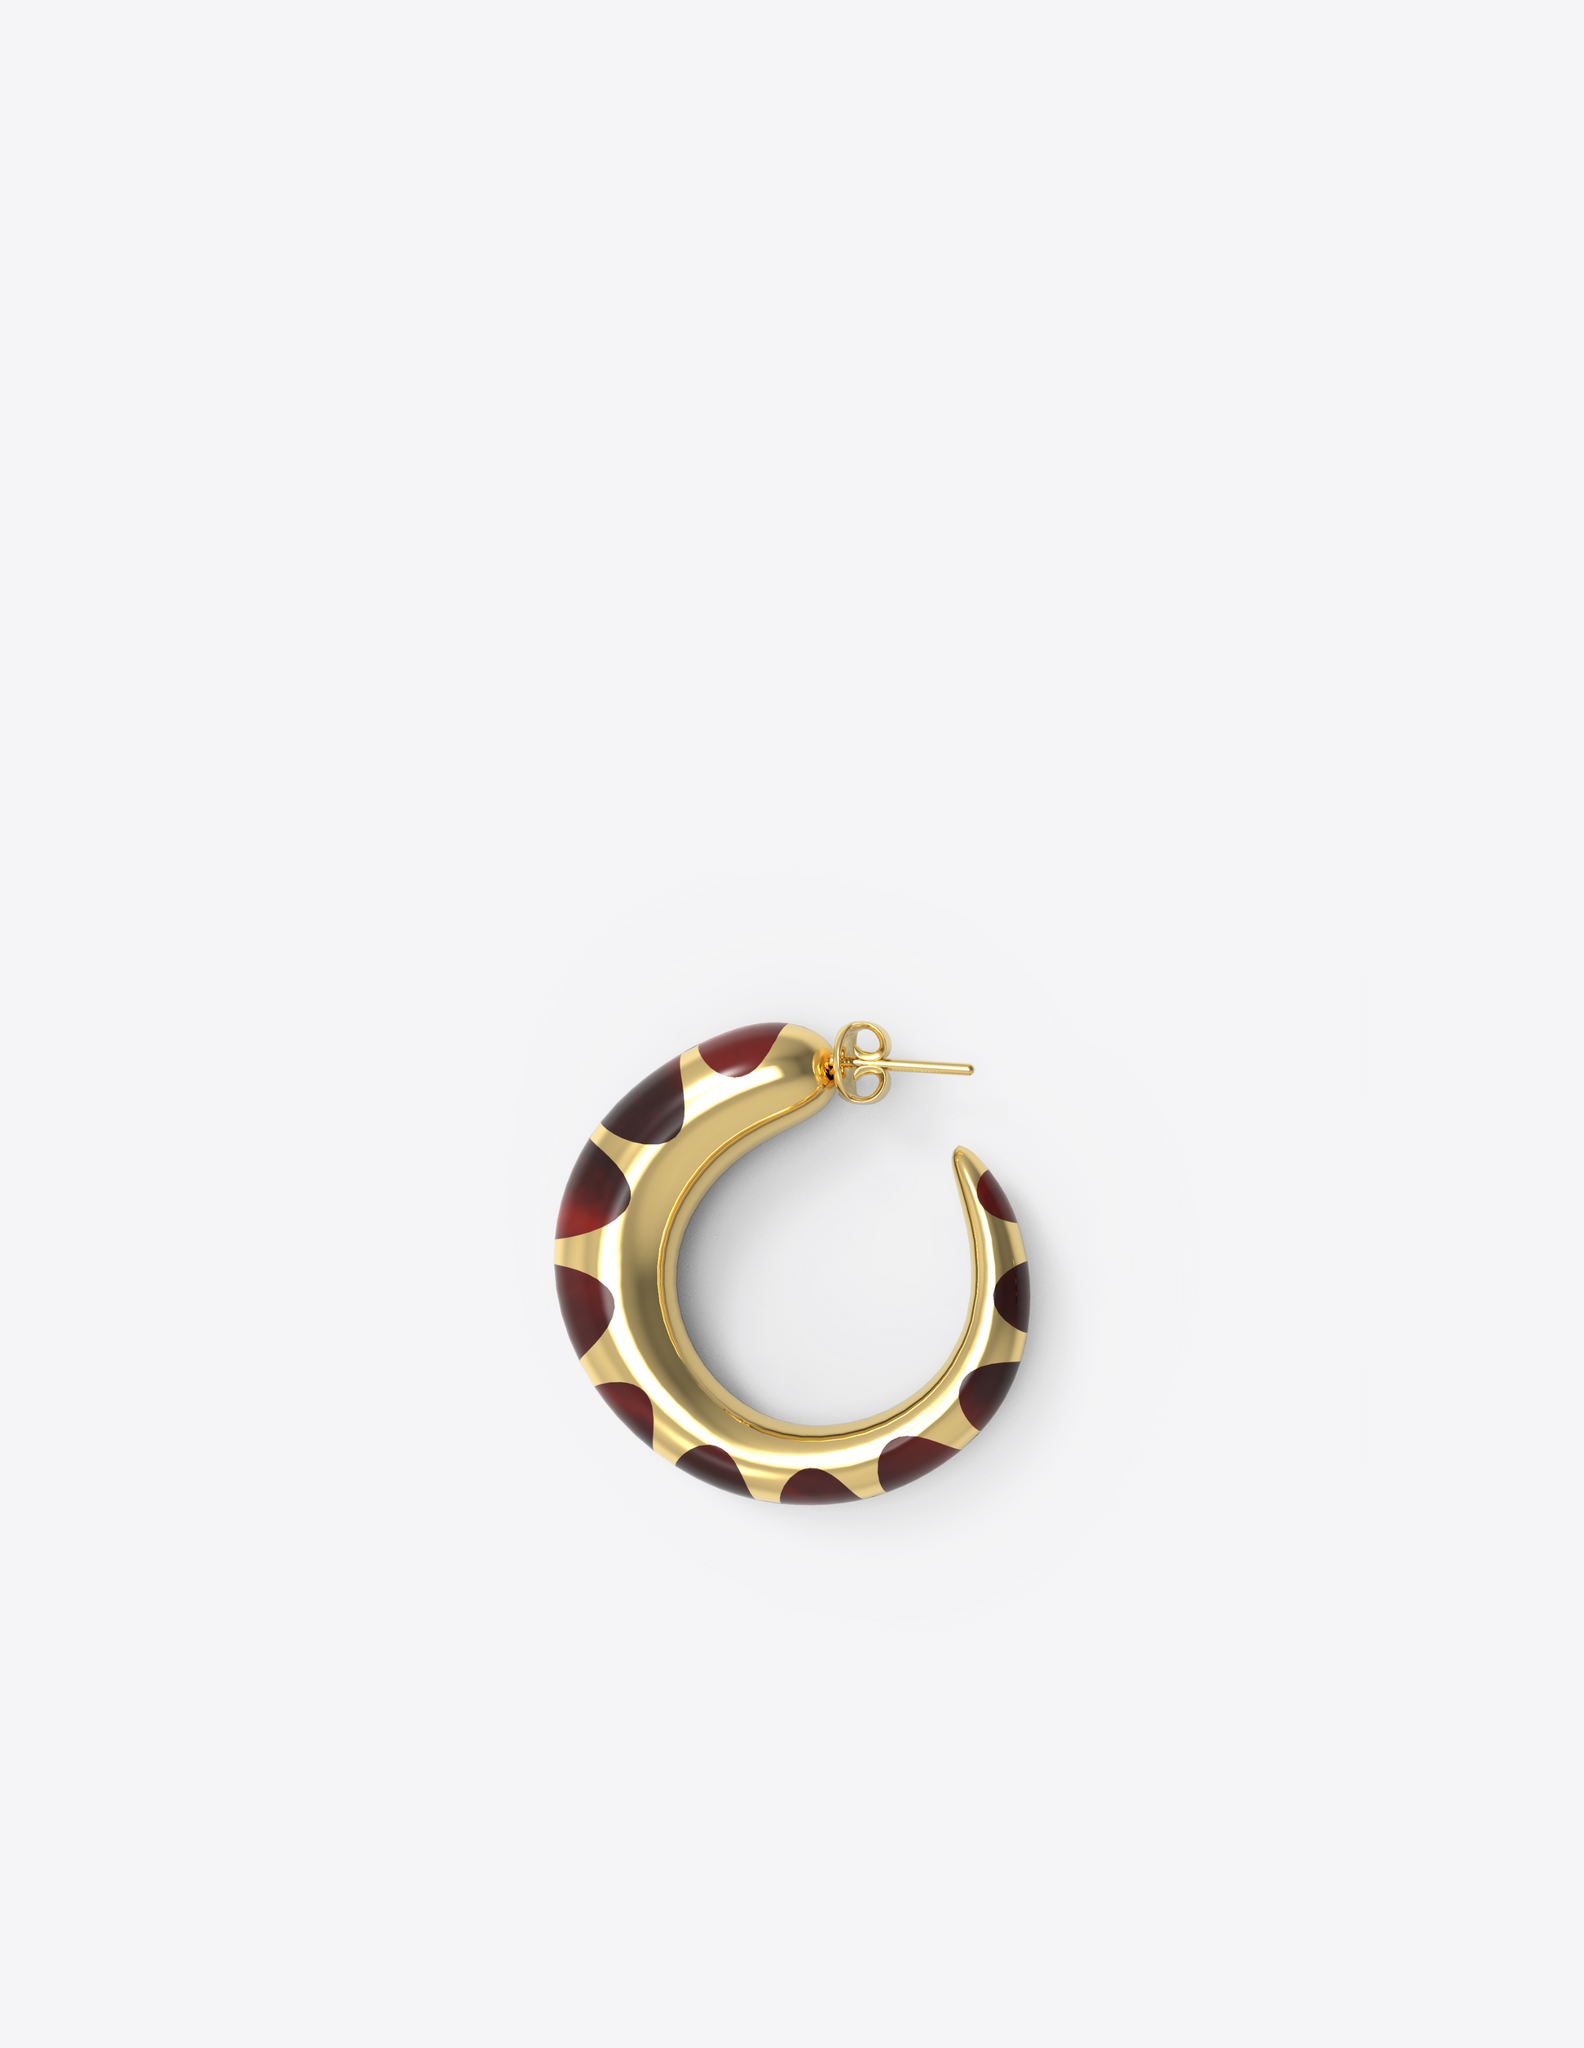 Tiny Khartoum Hoops with Striped Red Tiger Eye Inlay in Gold Vermeil